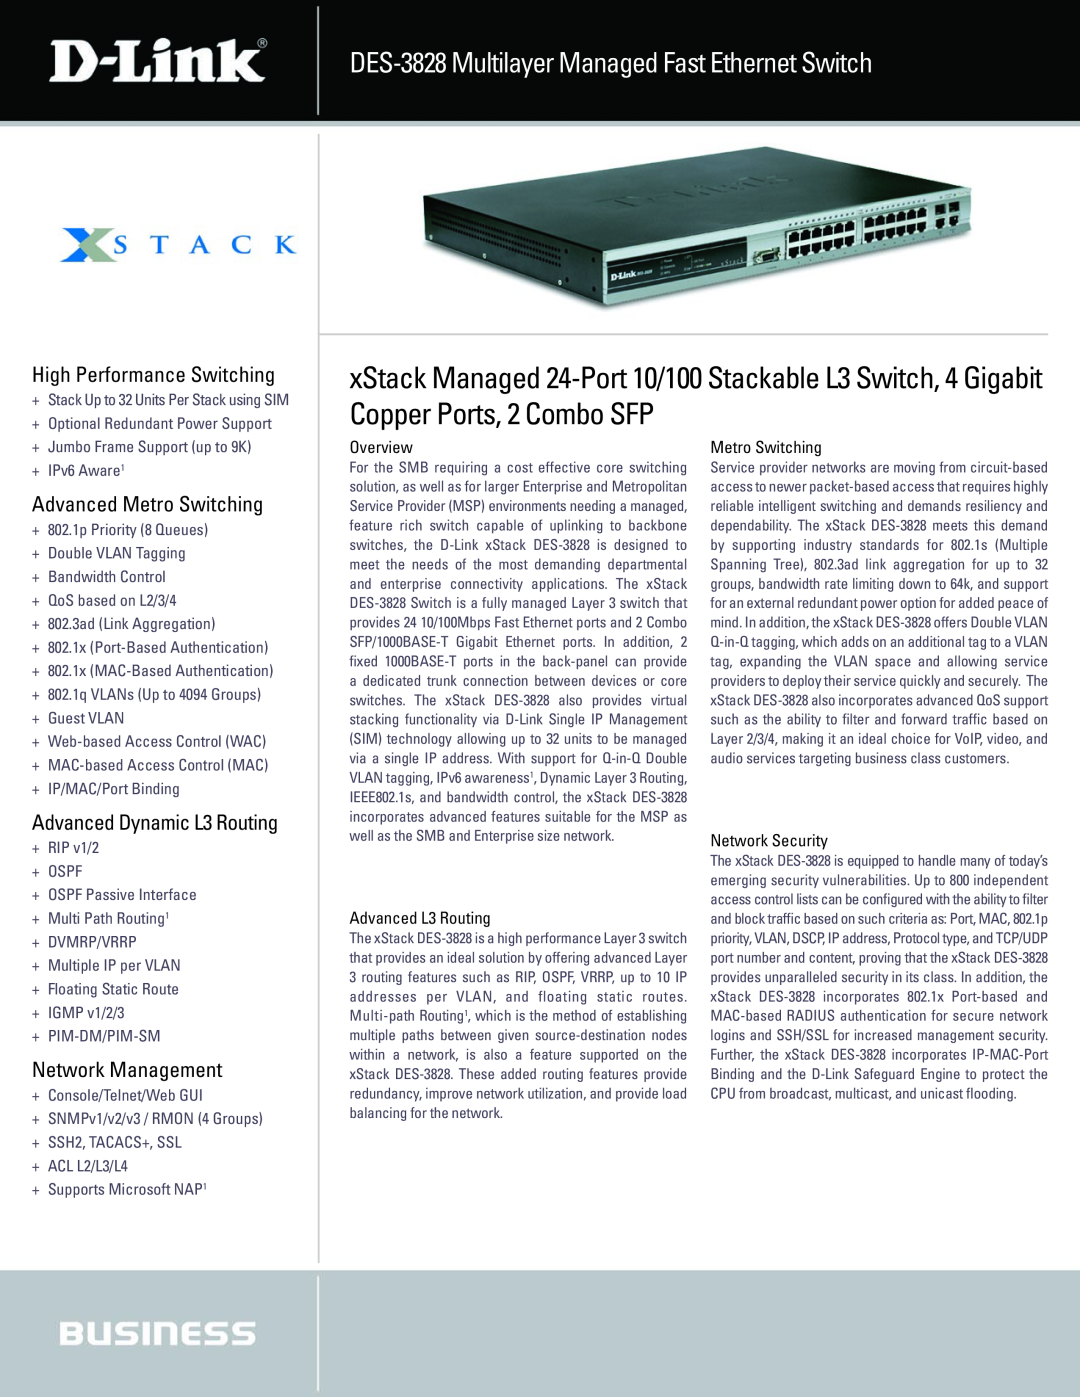 D-Link manual DES-3828 Multilayer Managed Fast Ethernet Switch, High Performance Switching, Advanced Metro Switching 